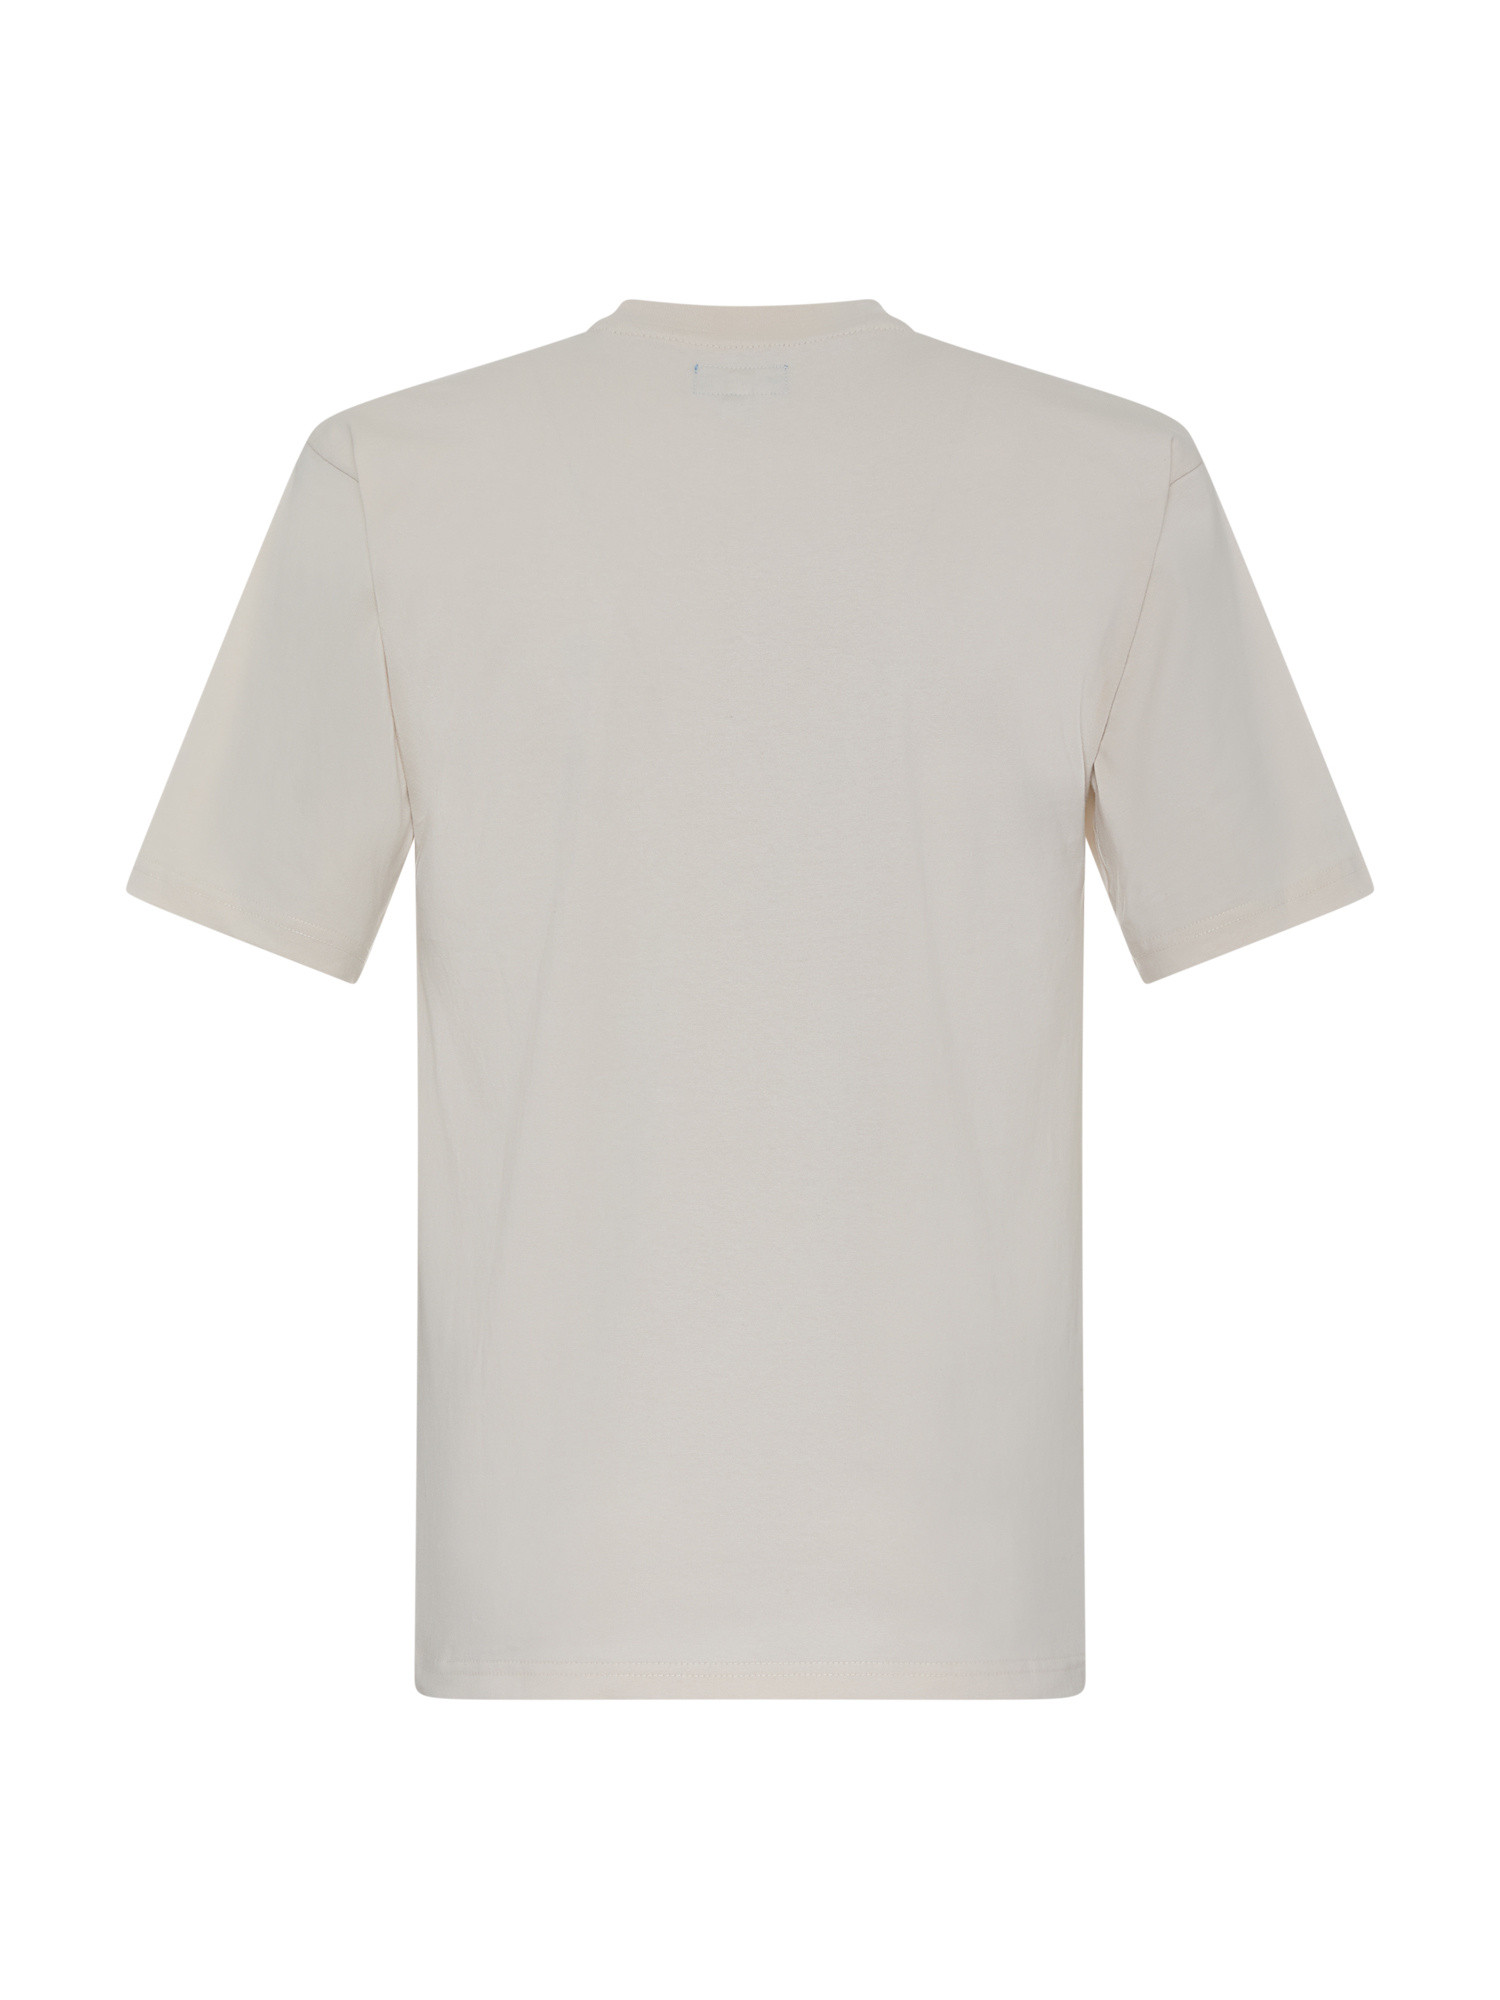 Market - Cotton T-shirt with print, Beige, large image number 1